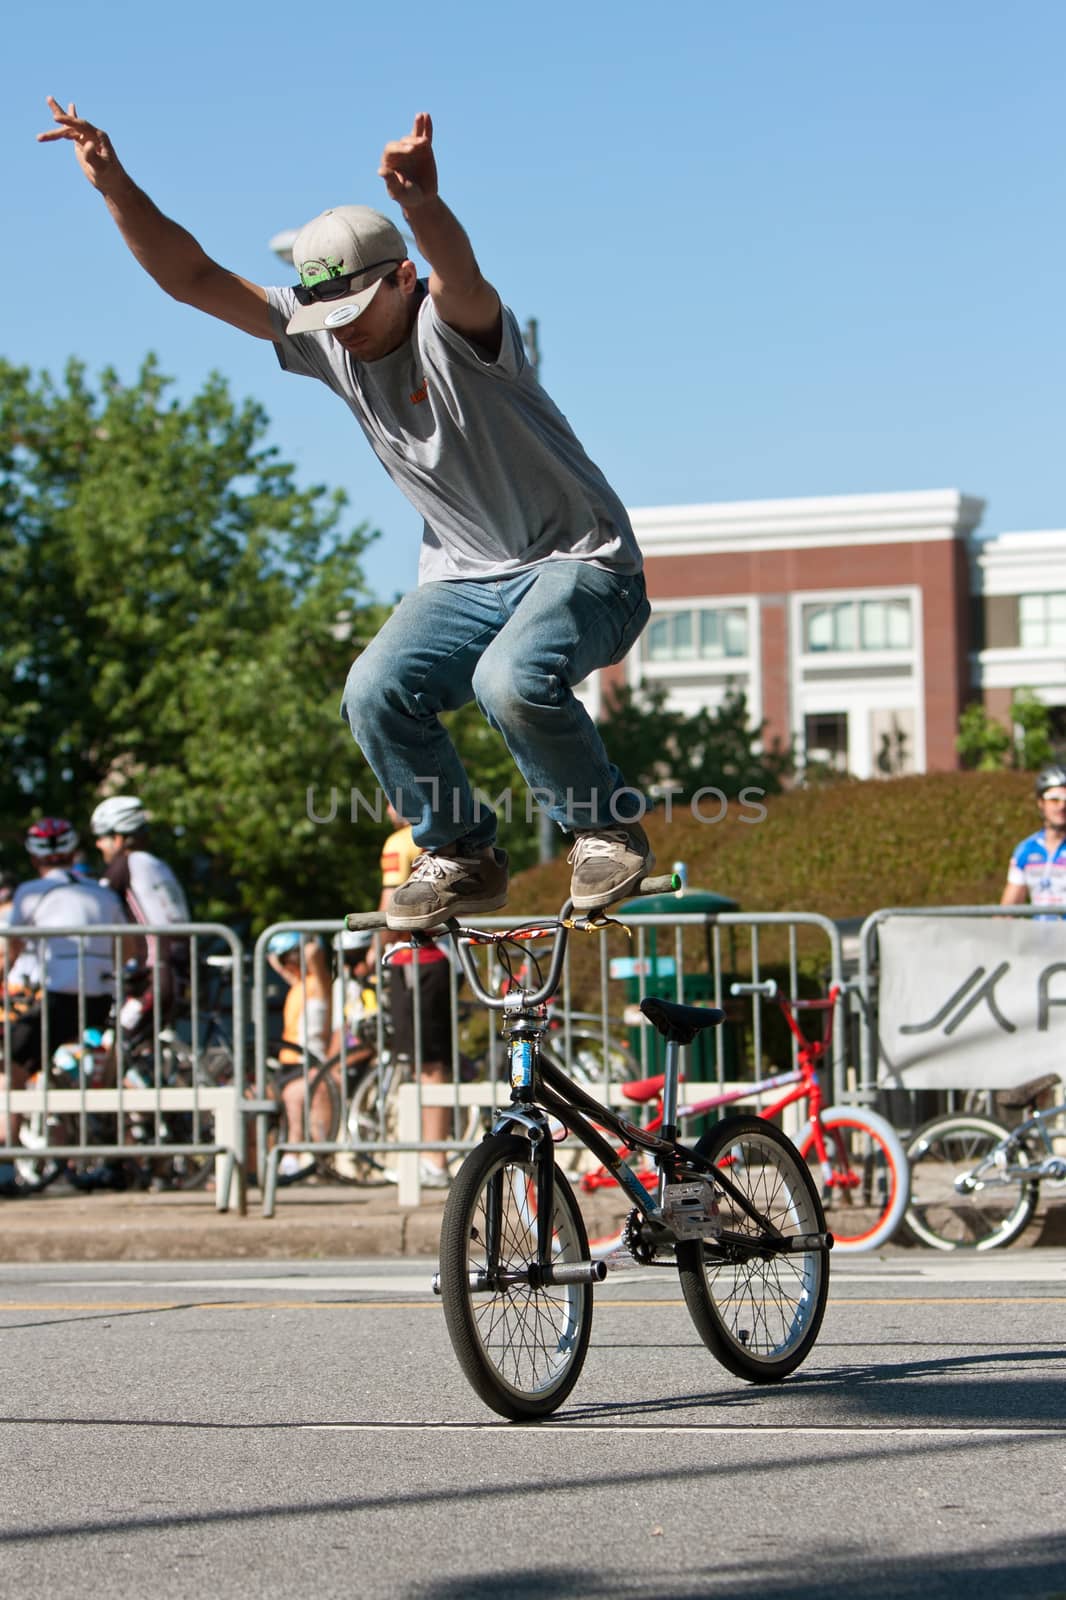 Athens, GA, USA - April 26, 2014:  A young man practices standing on the handlebars of his bike before the start of the BMX Trans Jam competition on the streets of downtown Athens.